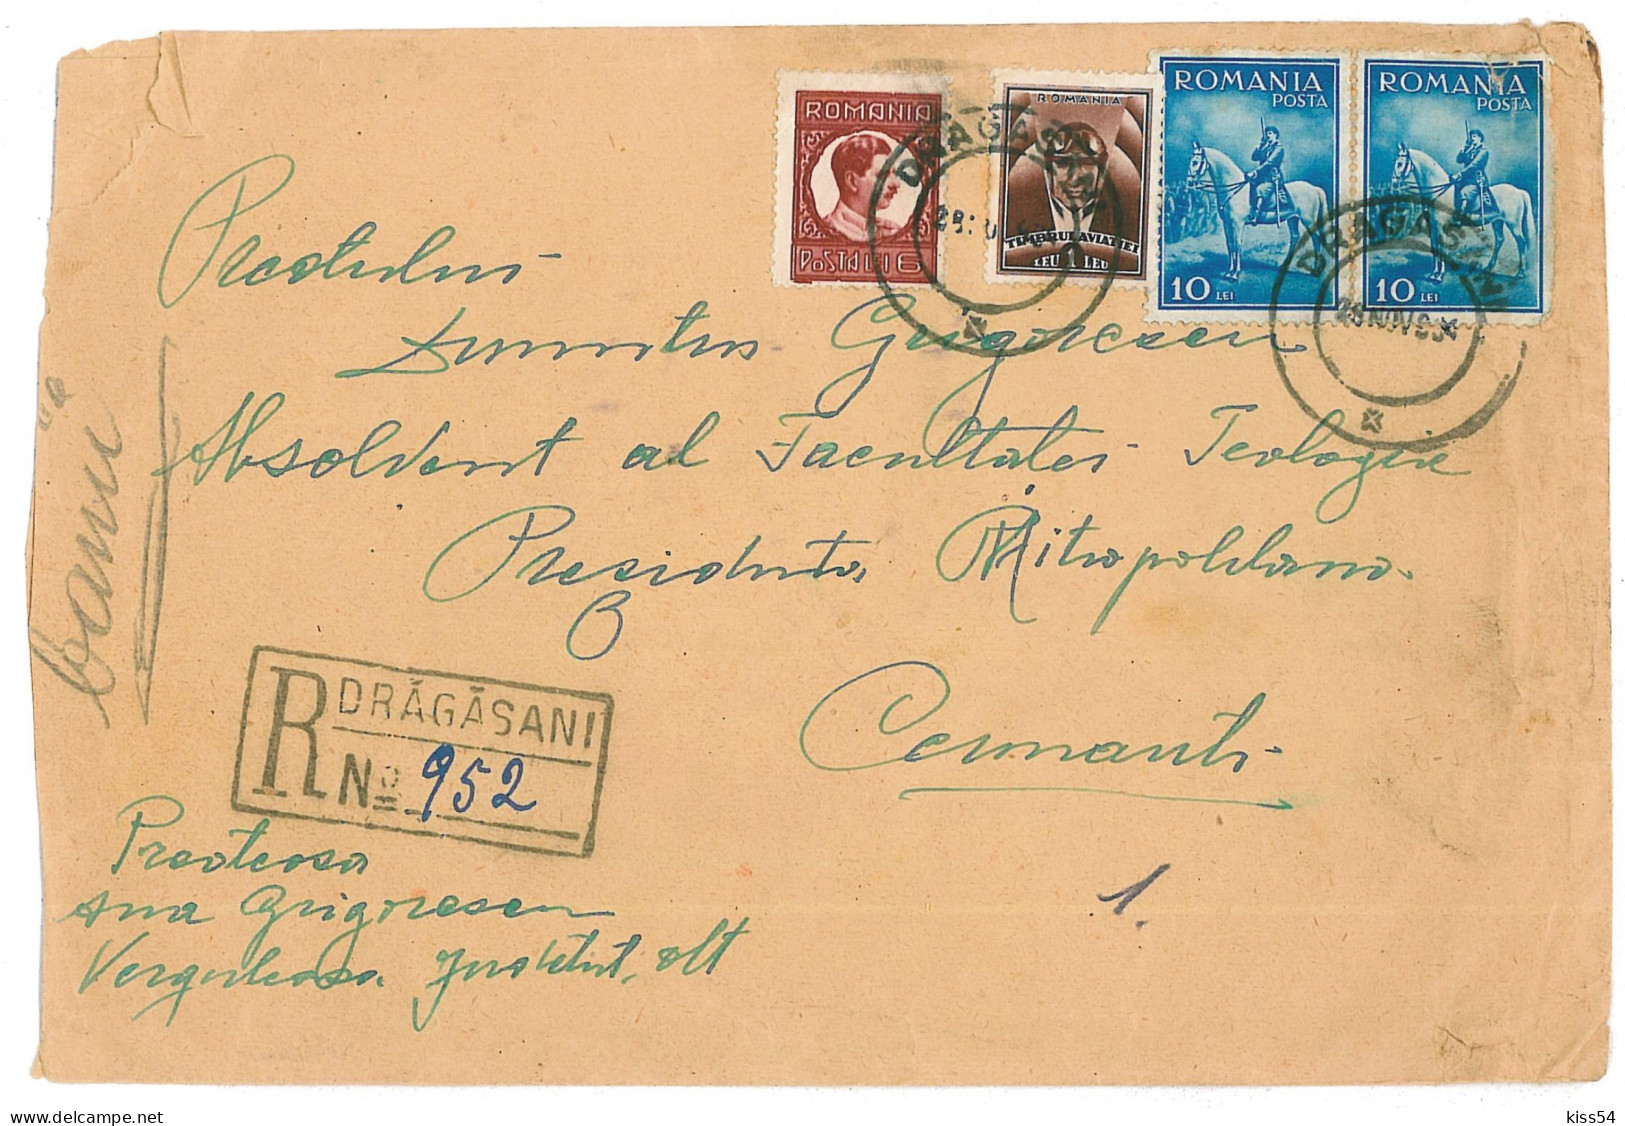 CIP 19 - 192-a DRAGASANI - CERNAUTI - REGISTERED Cover - Used - 1934 - Covers & Documents